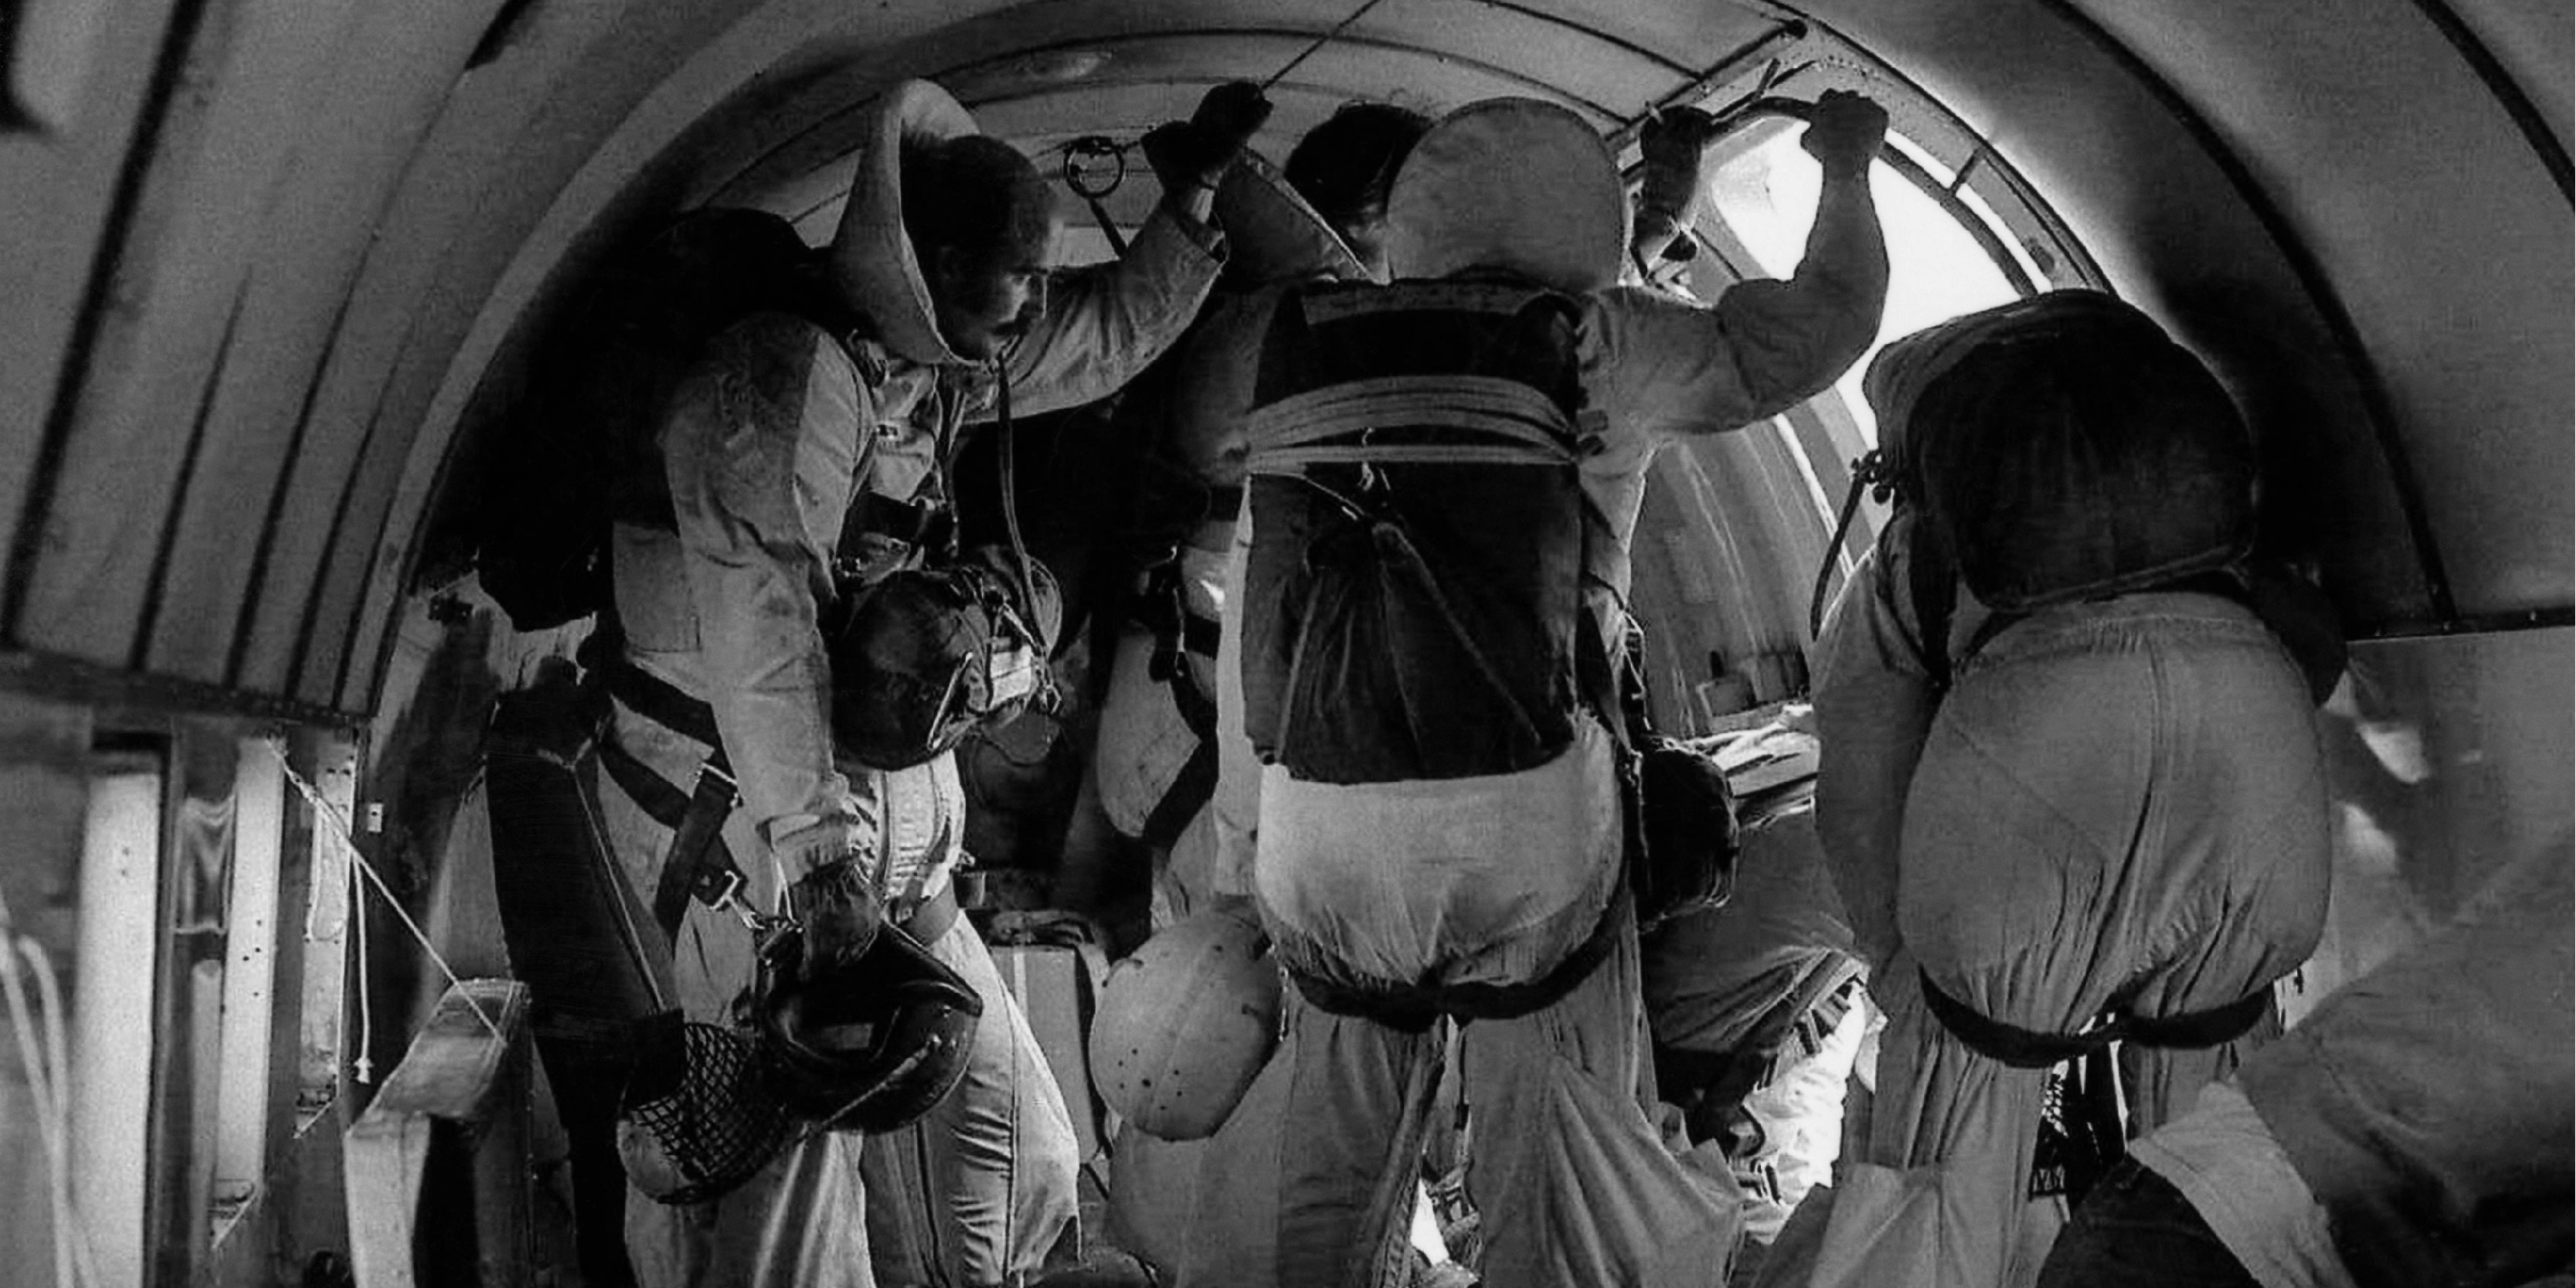 smokejumper firefighters inside airplane